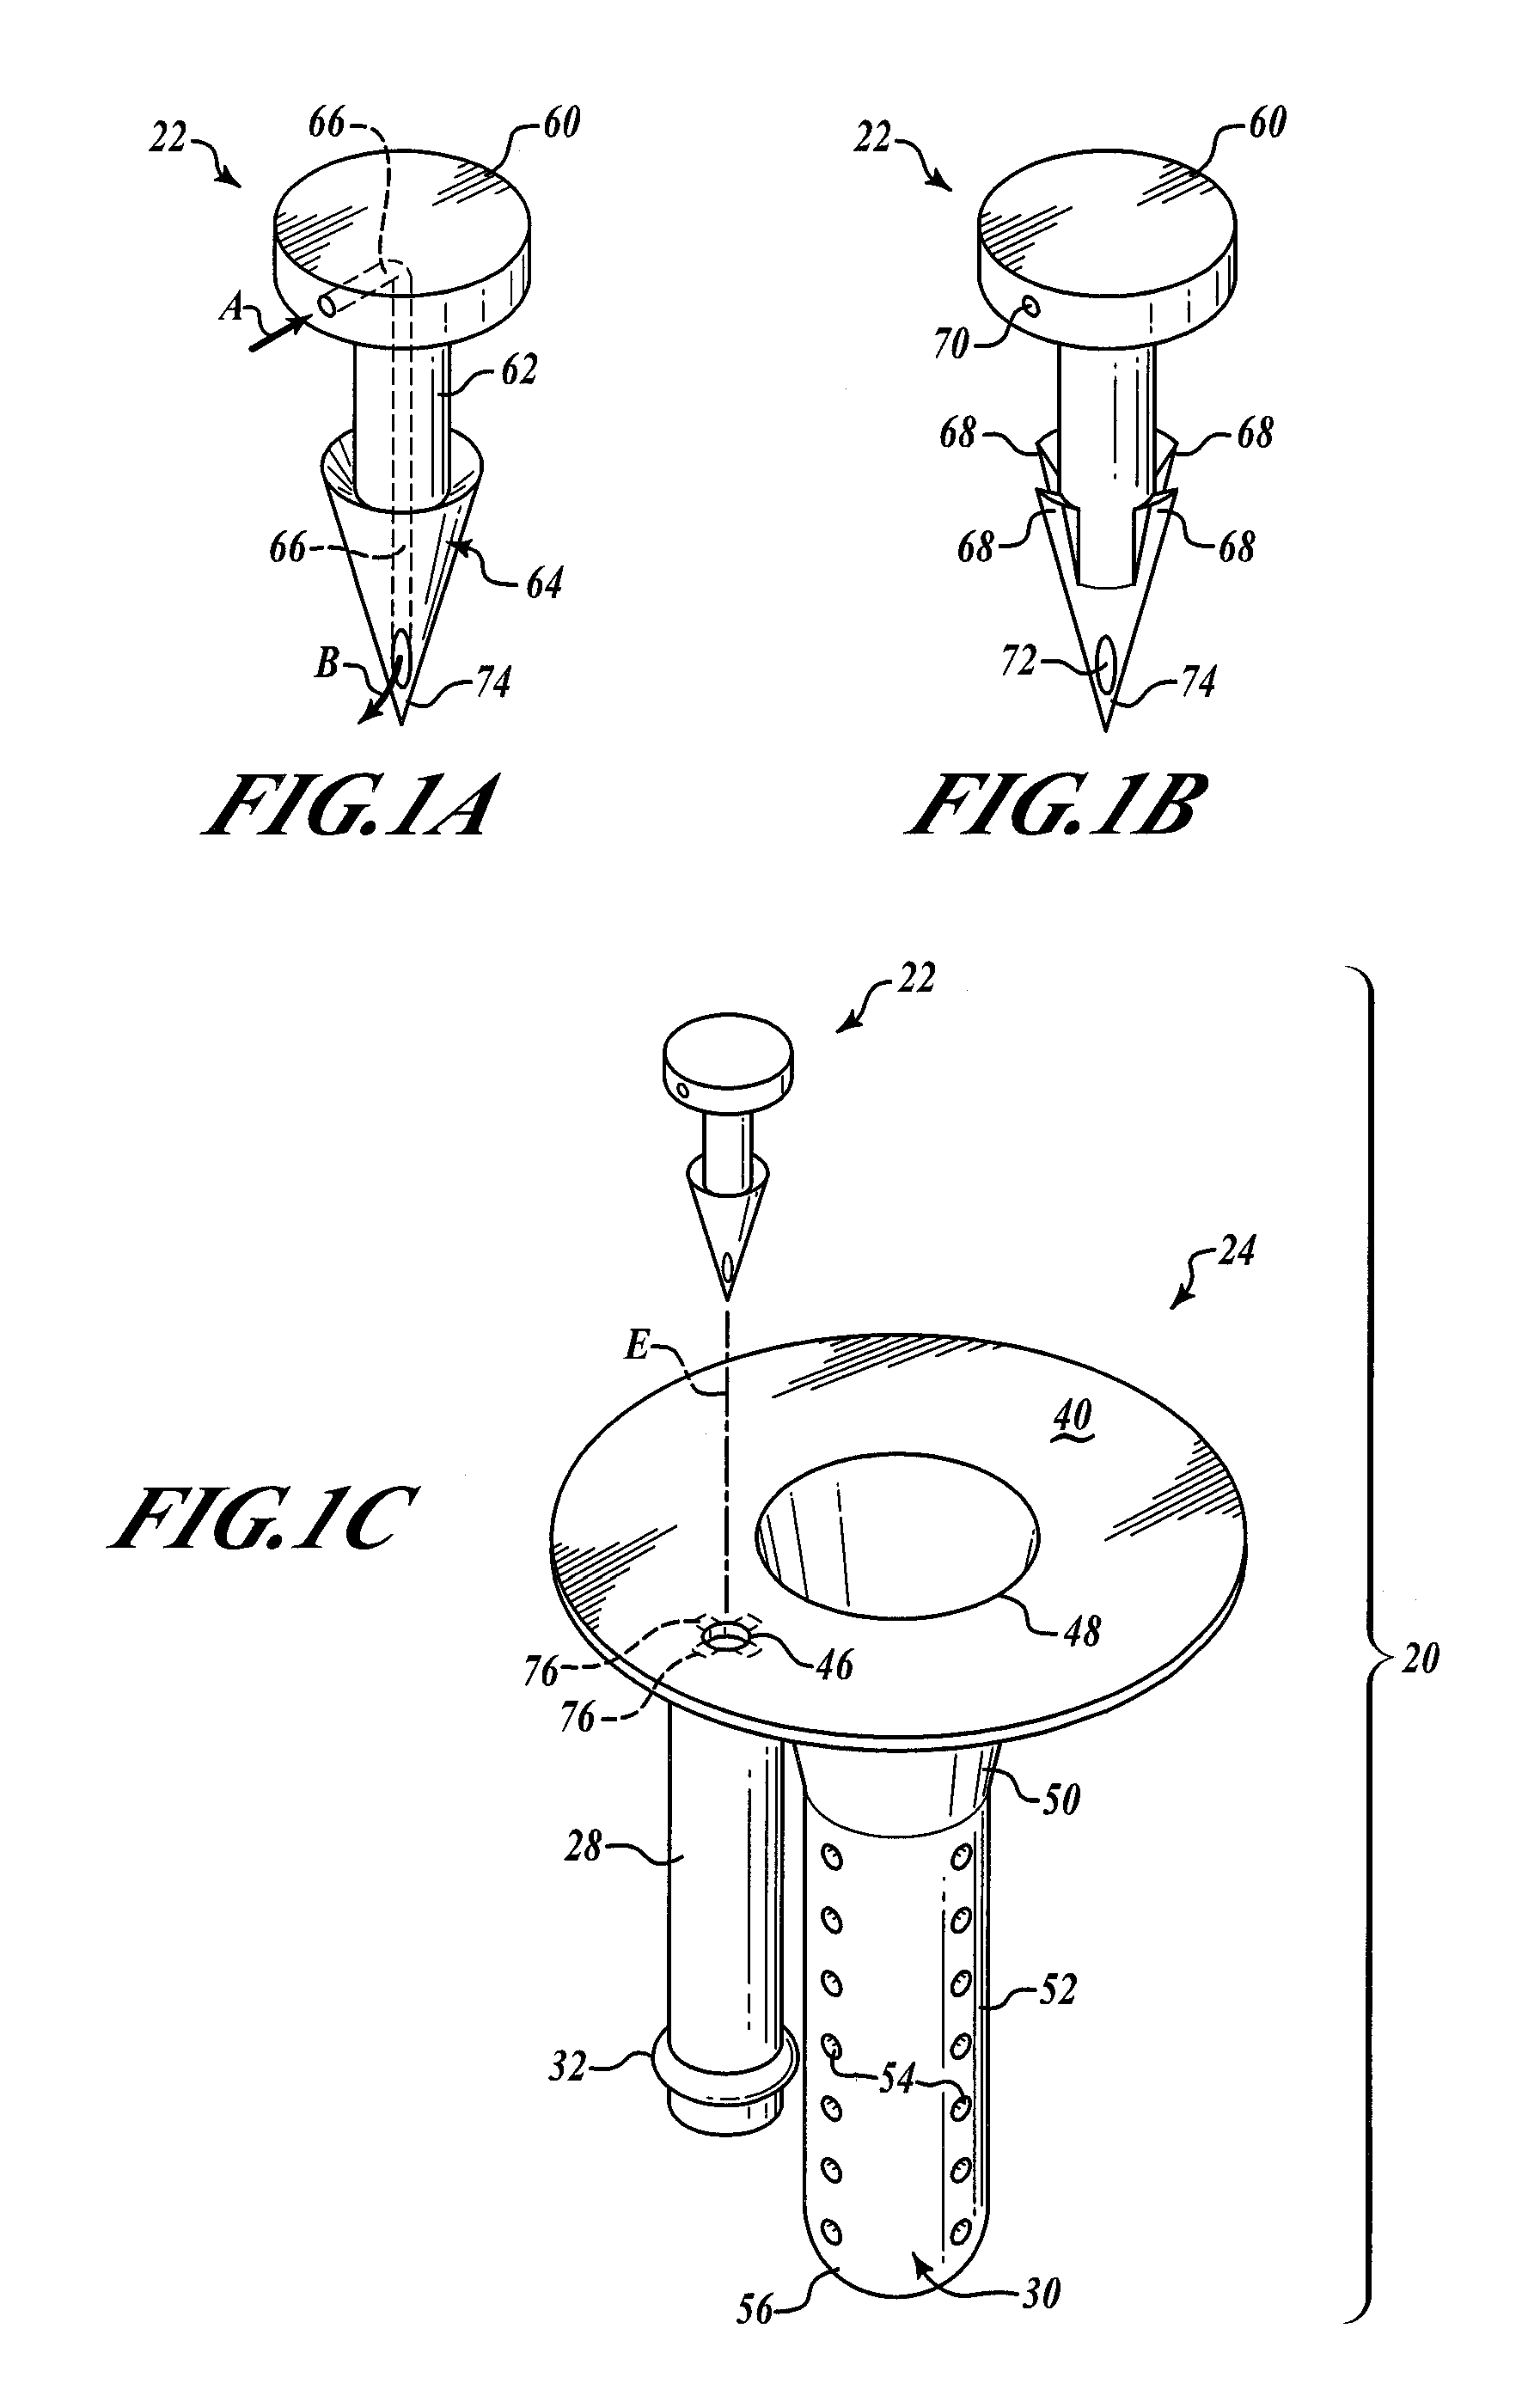 Vial assembly and method for reducing nosocomial infections